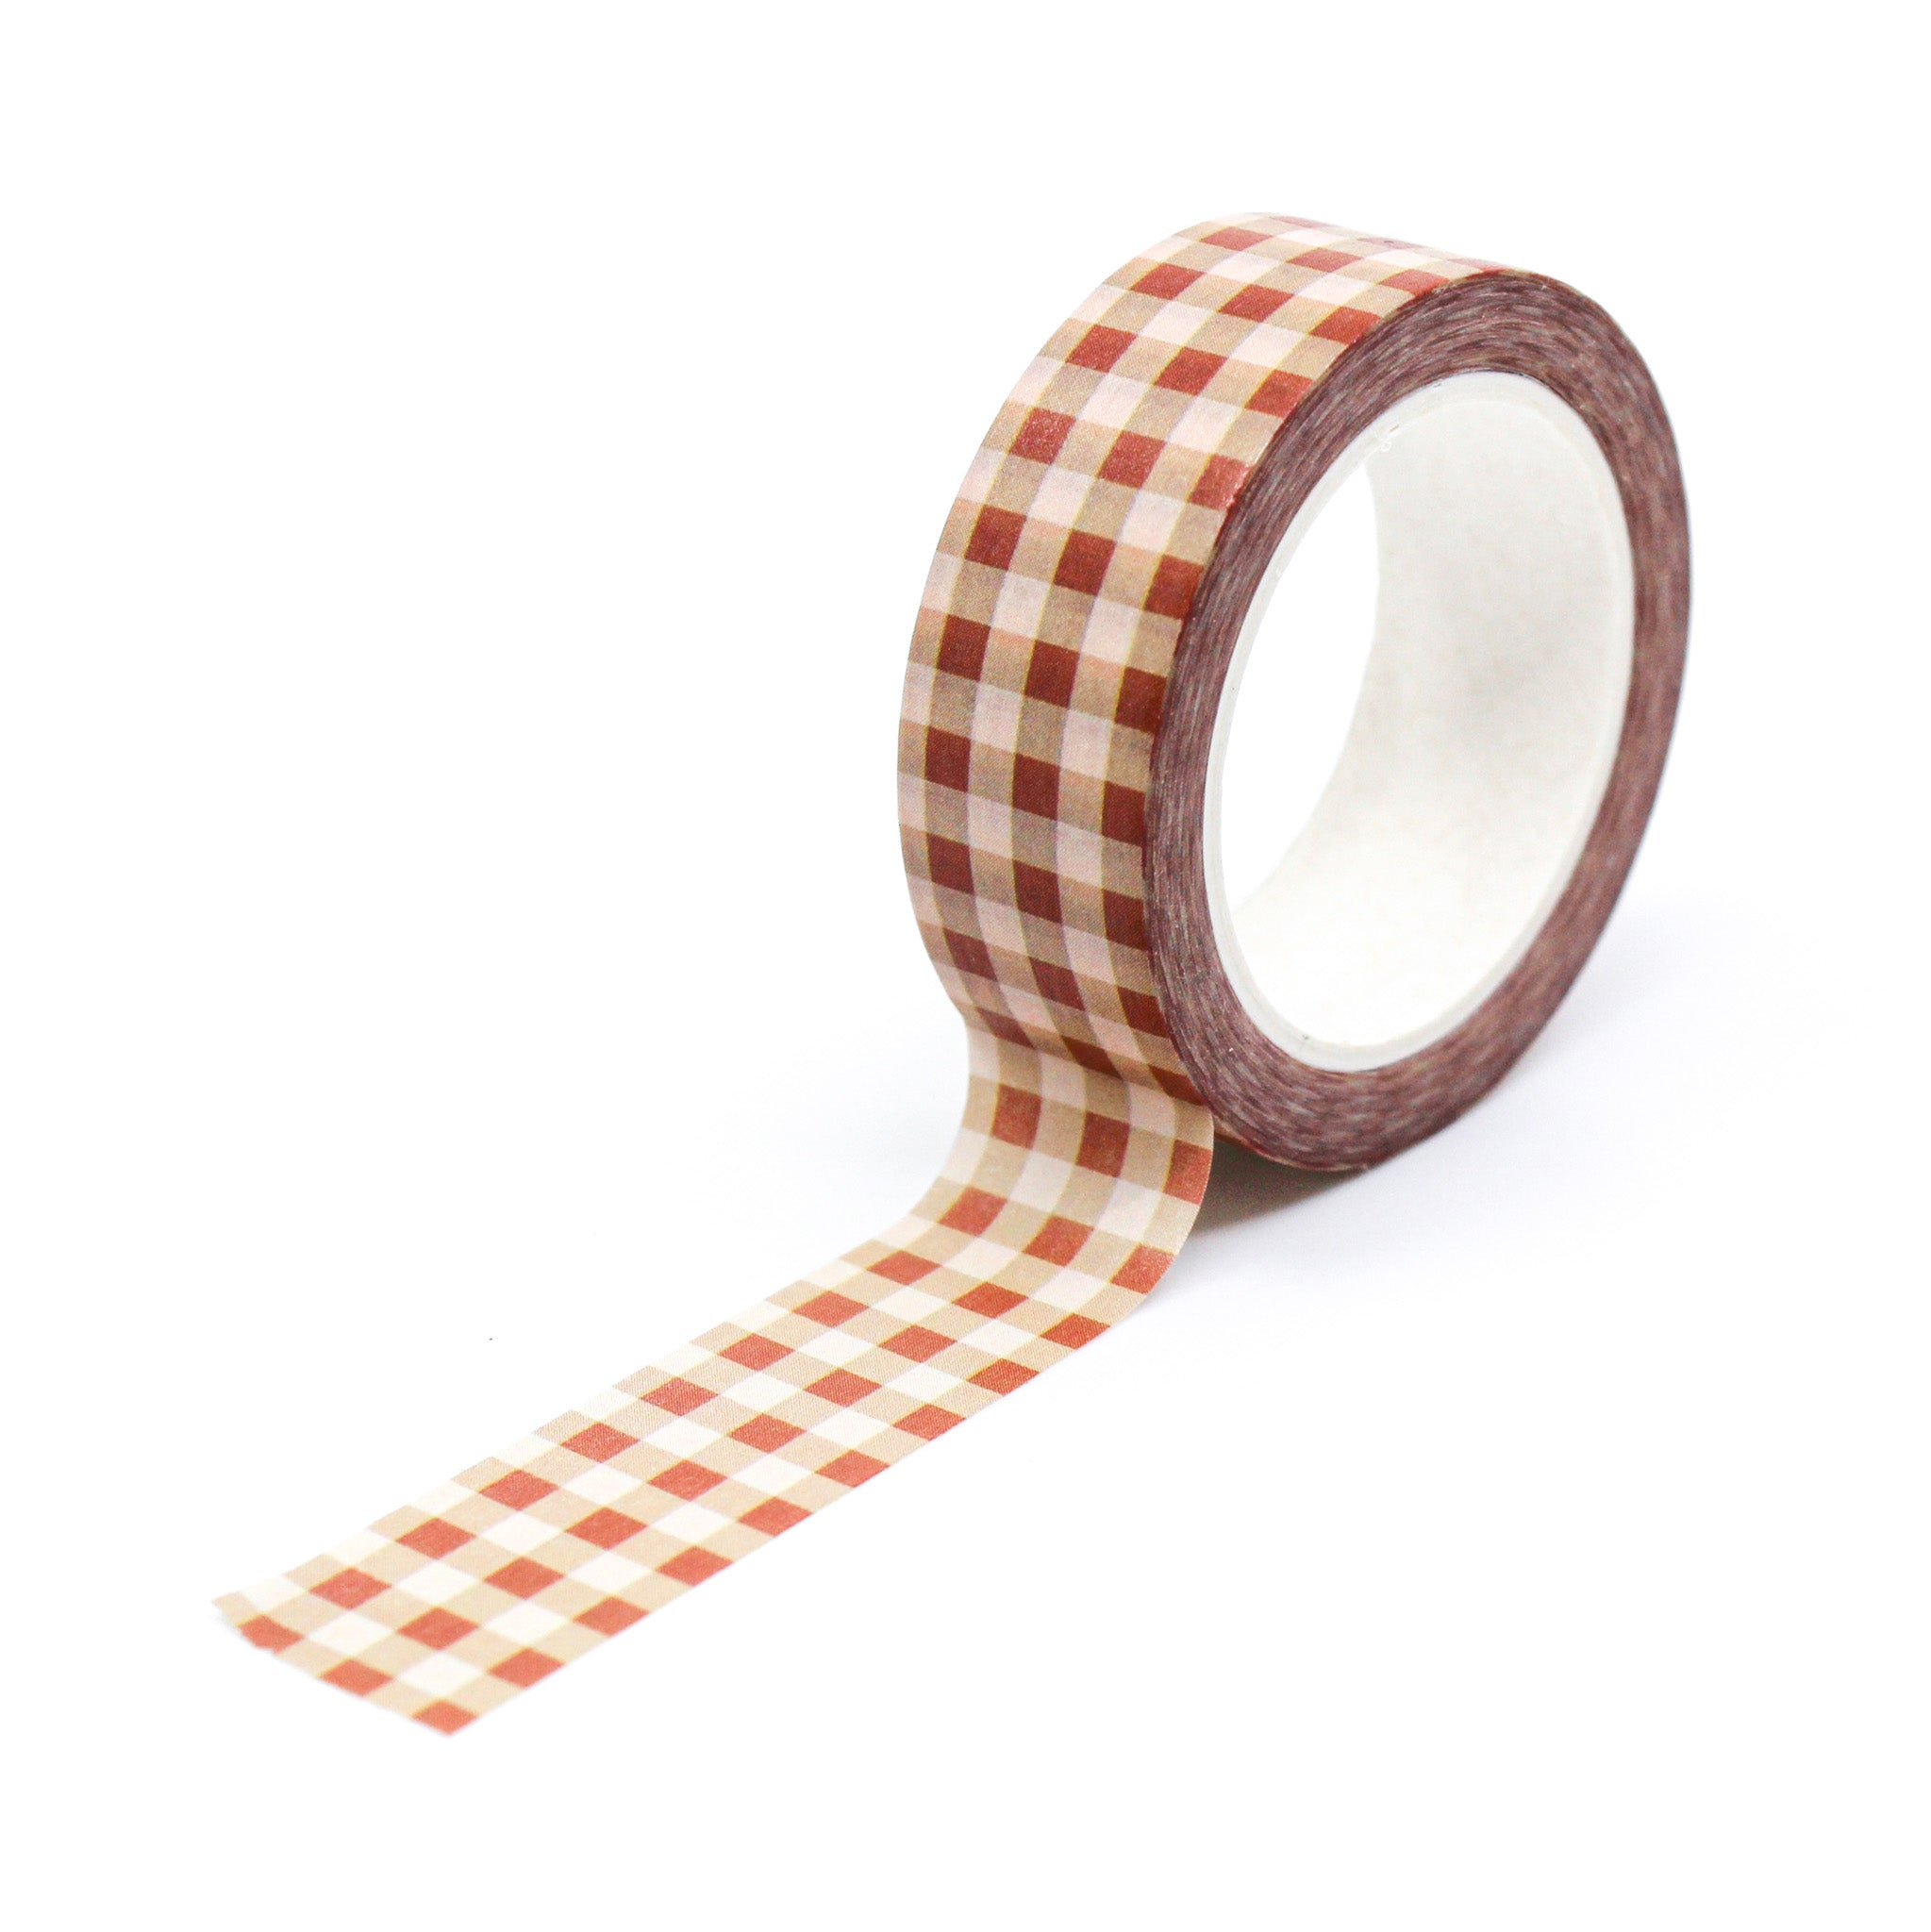 his is a full pattern repeat view of yellow plaid washi tape from BBB Supplies Craft Shop